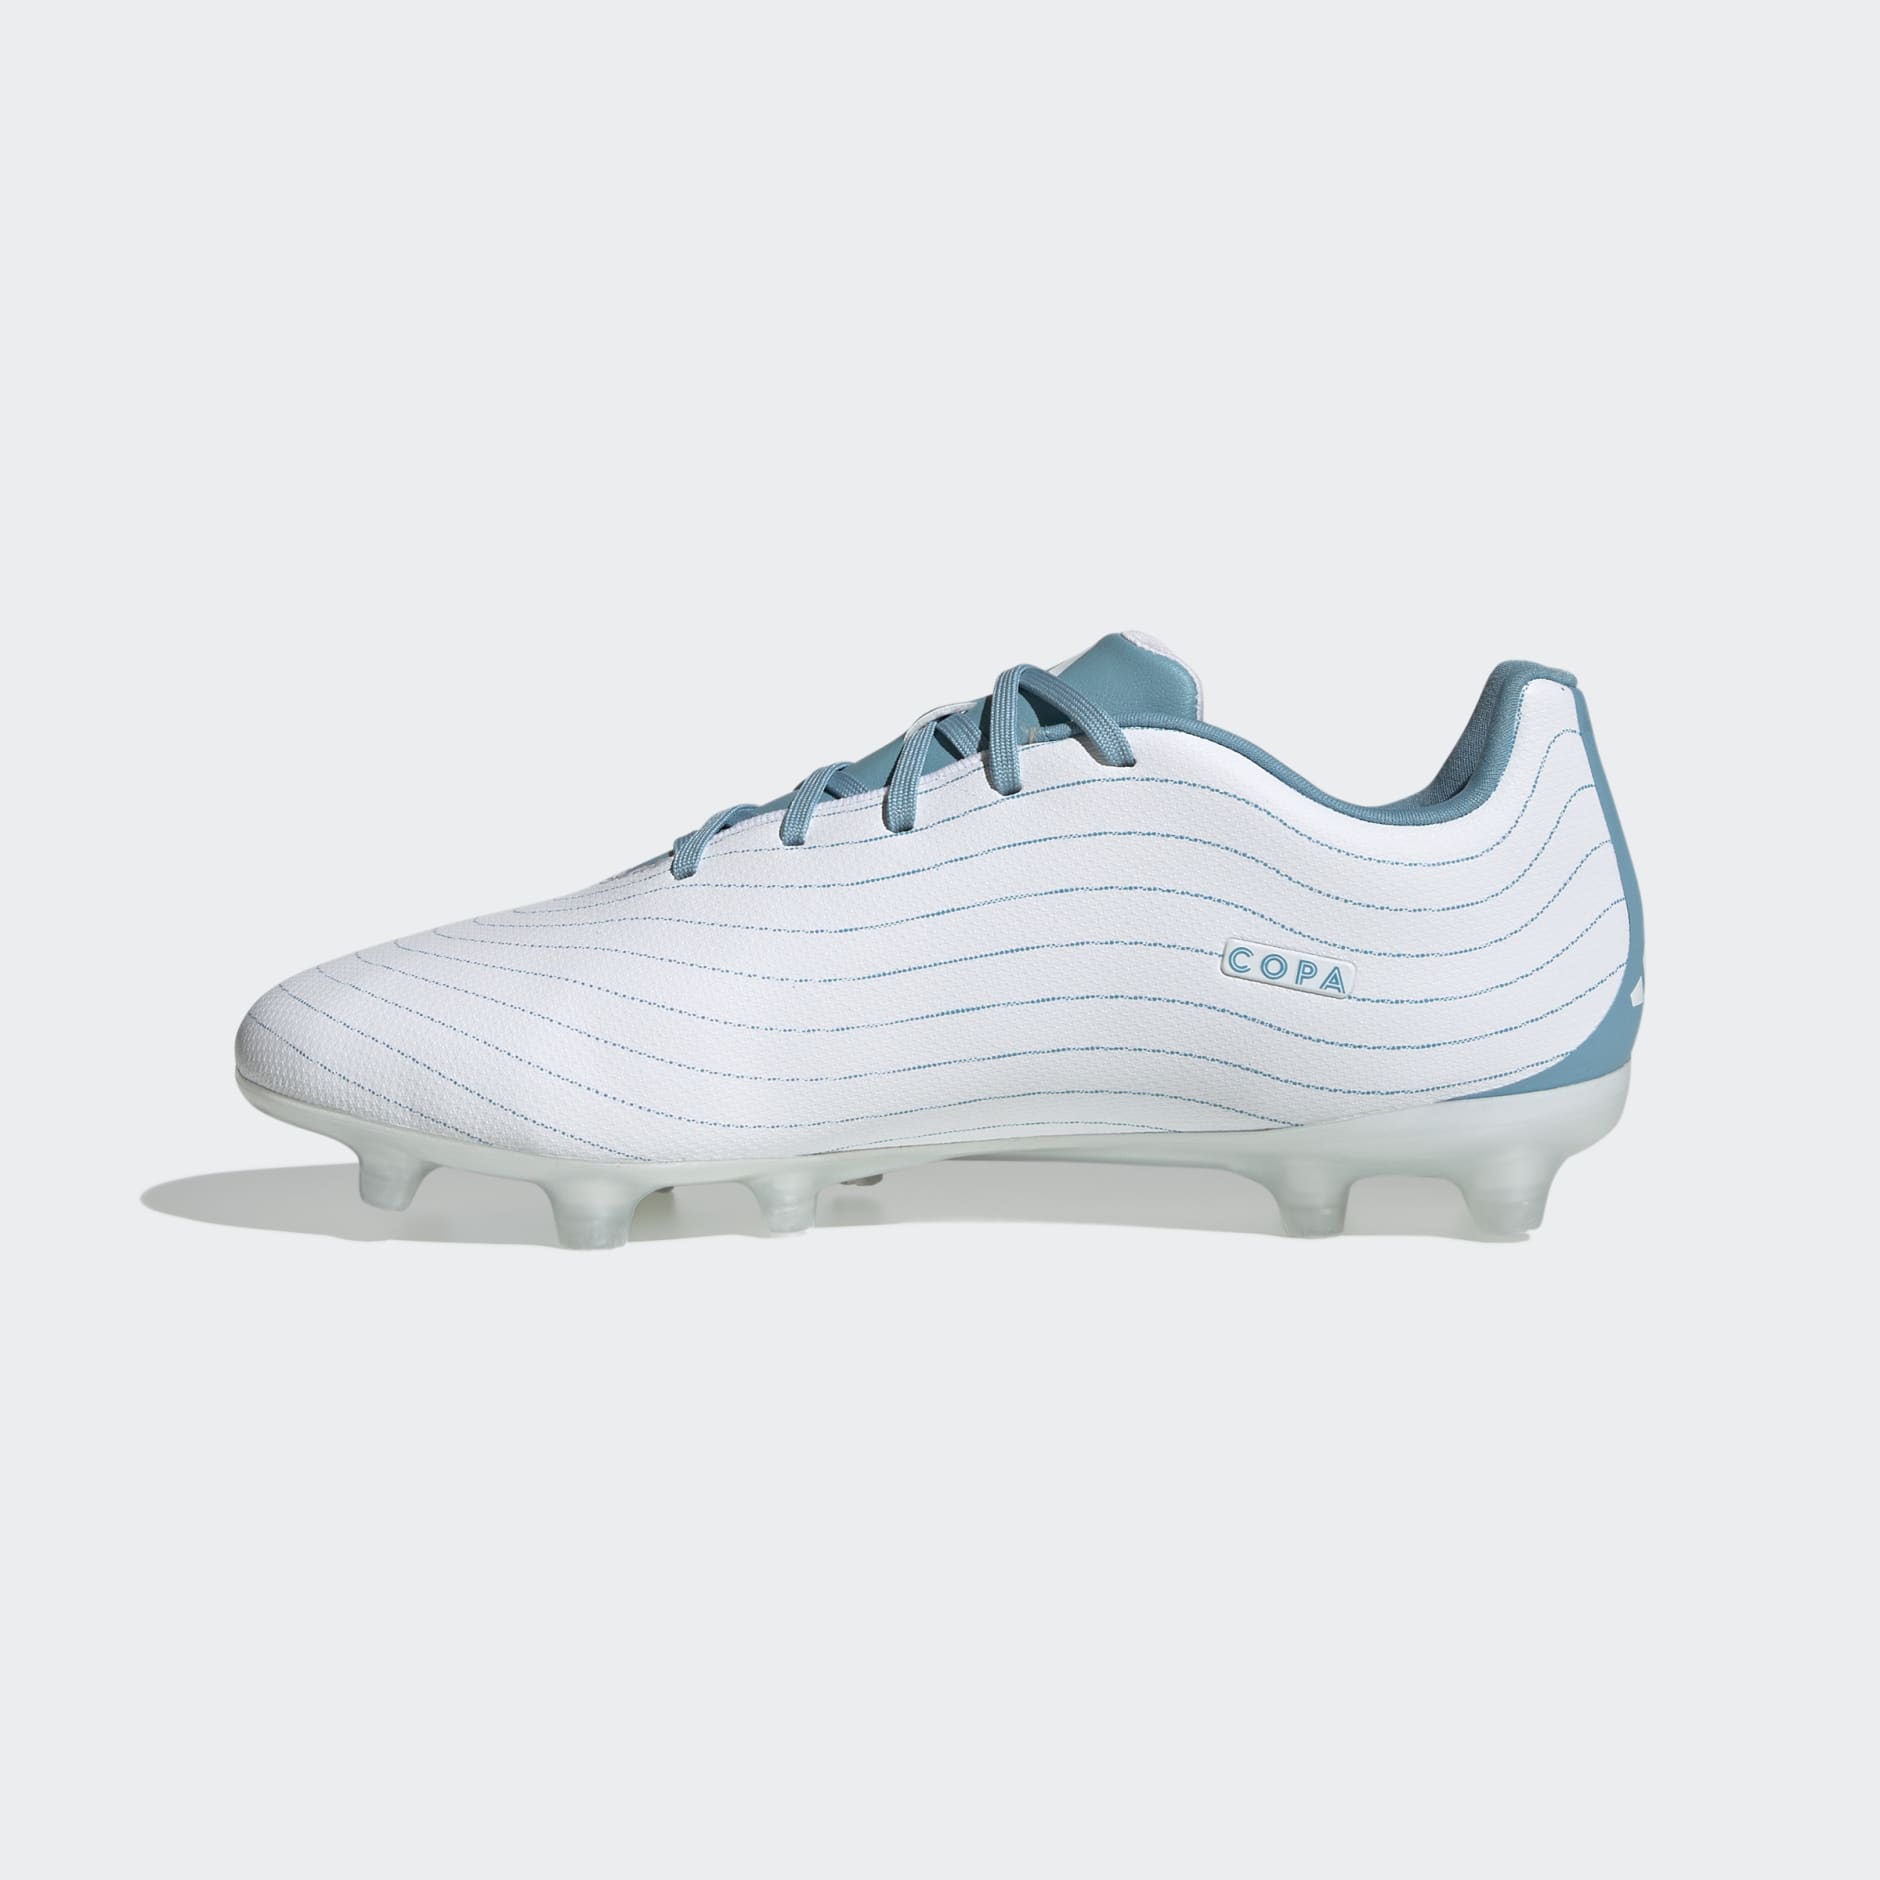 adidas Copa Pure.3 Firm Ground Boots - White | adidas IL